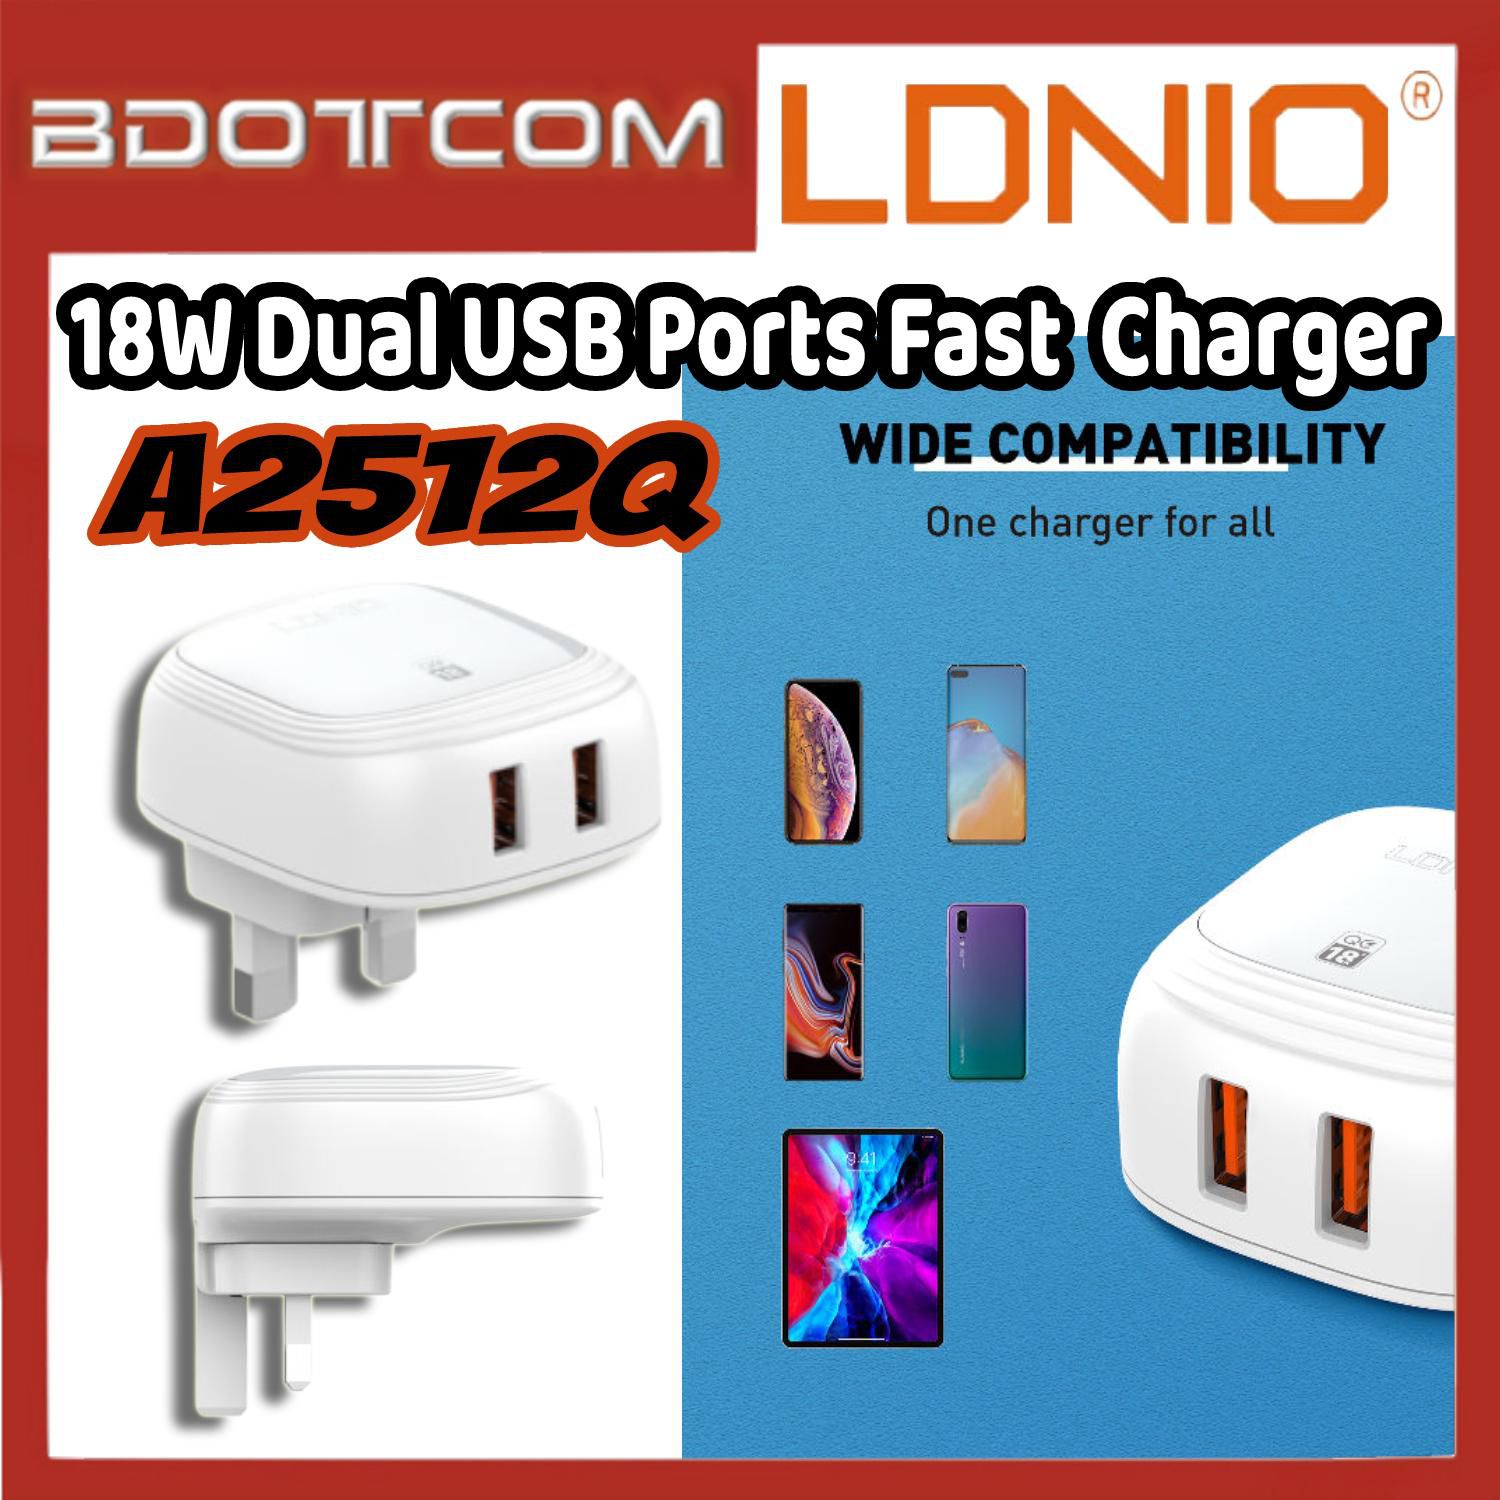 [Ready Stock] LDNIO A2512Q 18W Dual USB Ports Fast Charge Wall Charger